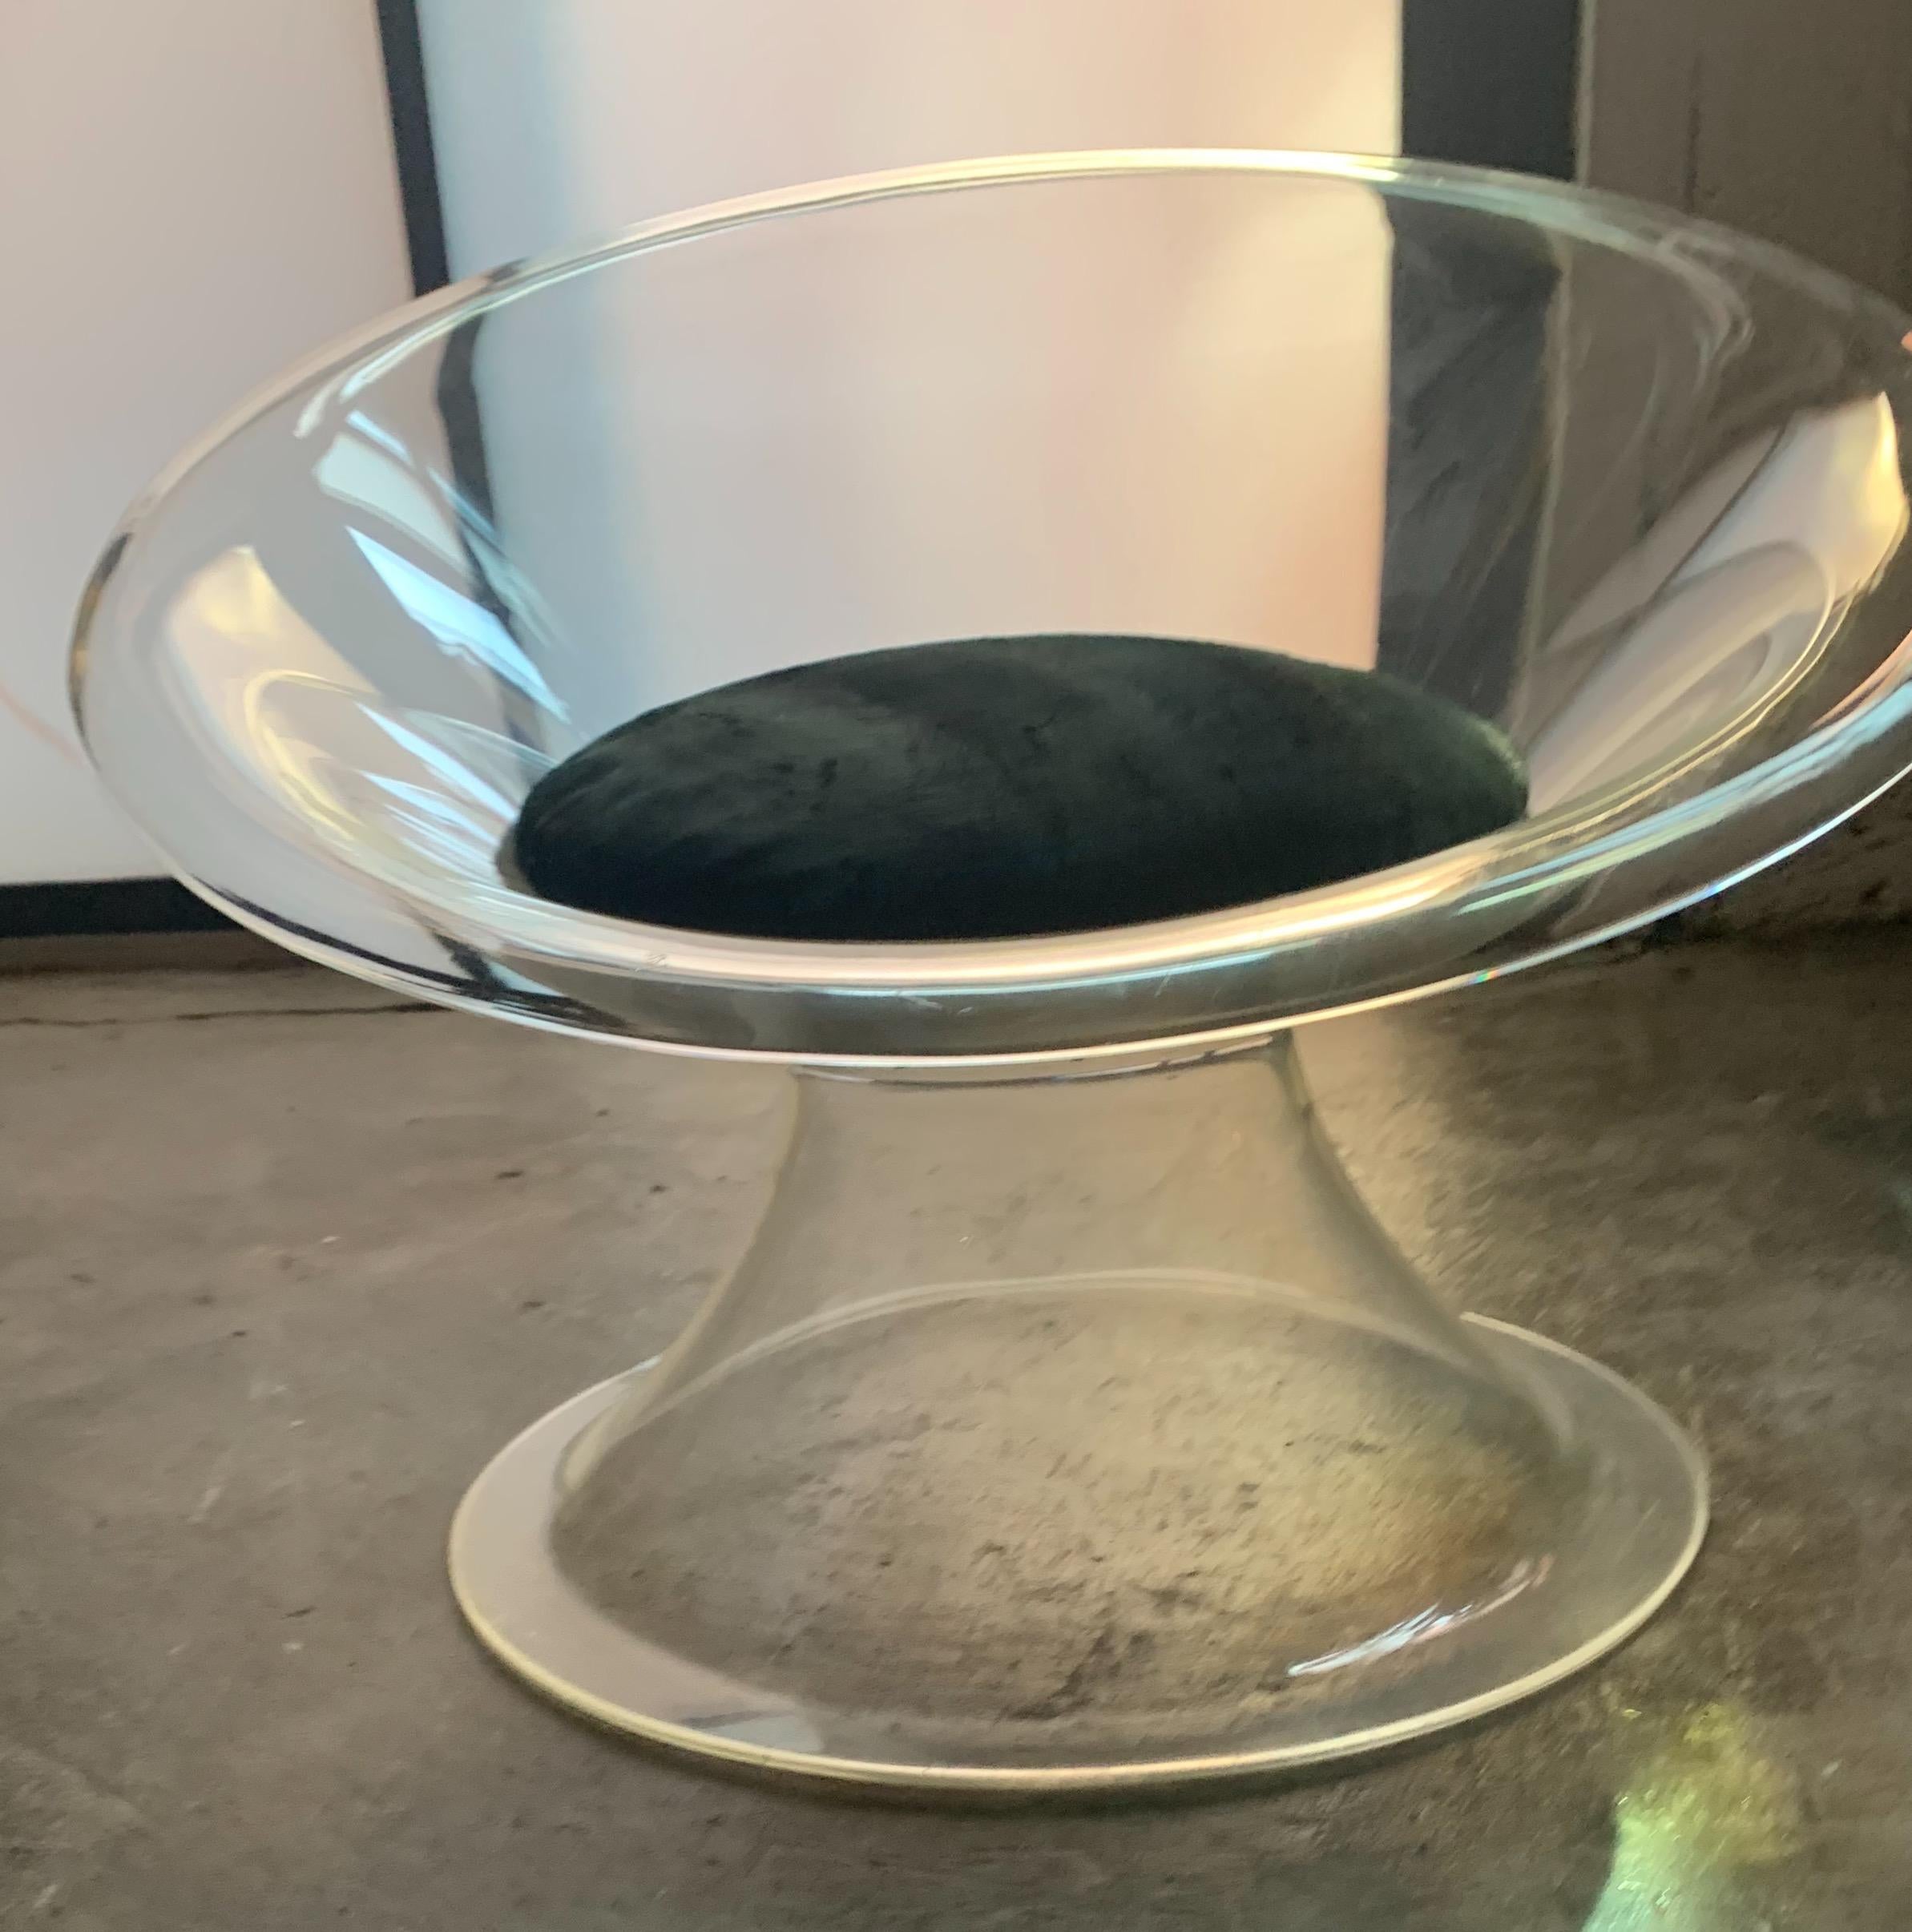 Laverne International buttercup Lucite lounge chair, Invisible Group, 1959. Considered a masterpiece upon release, Laverne's Invisible Group Collection remains the epitome of midcentury chic. Fashion editorials and Madison Avenue couldn't get enough